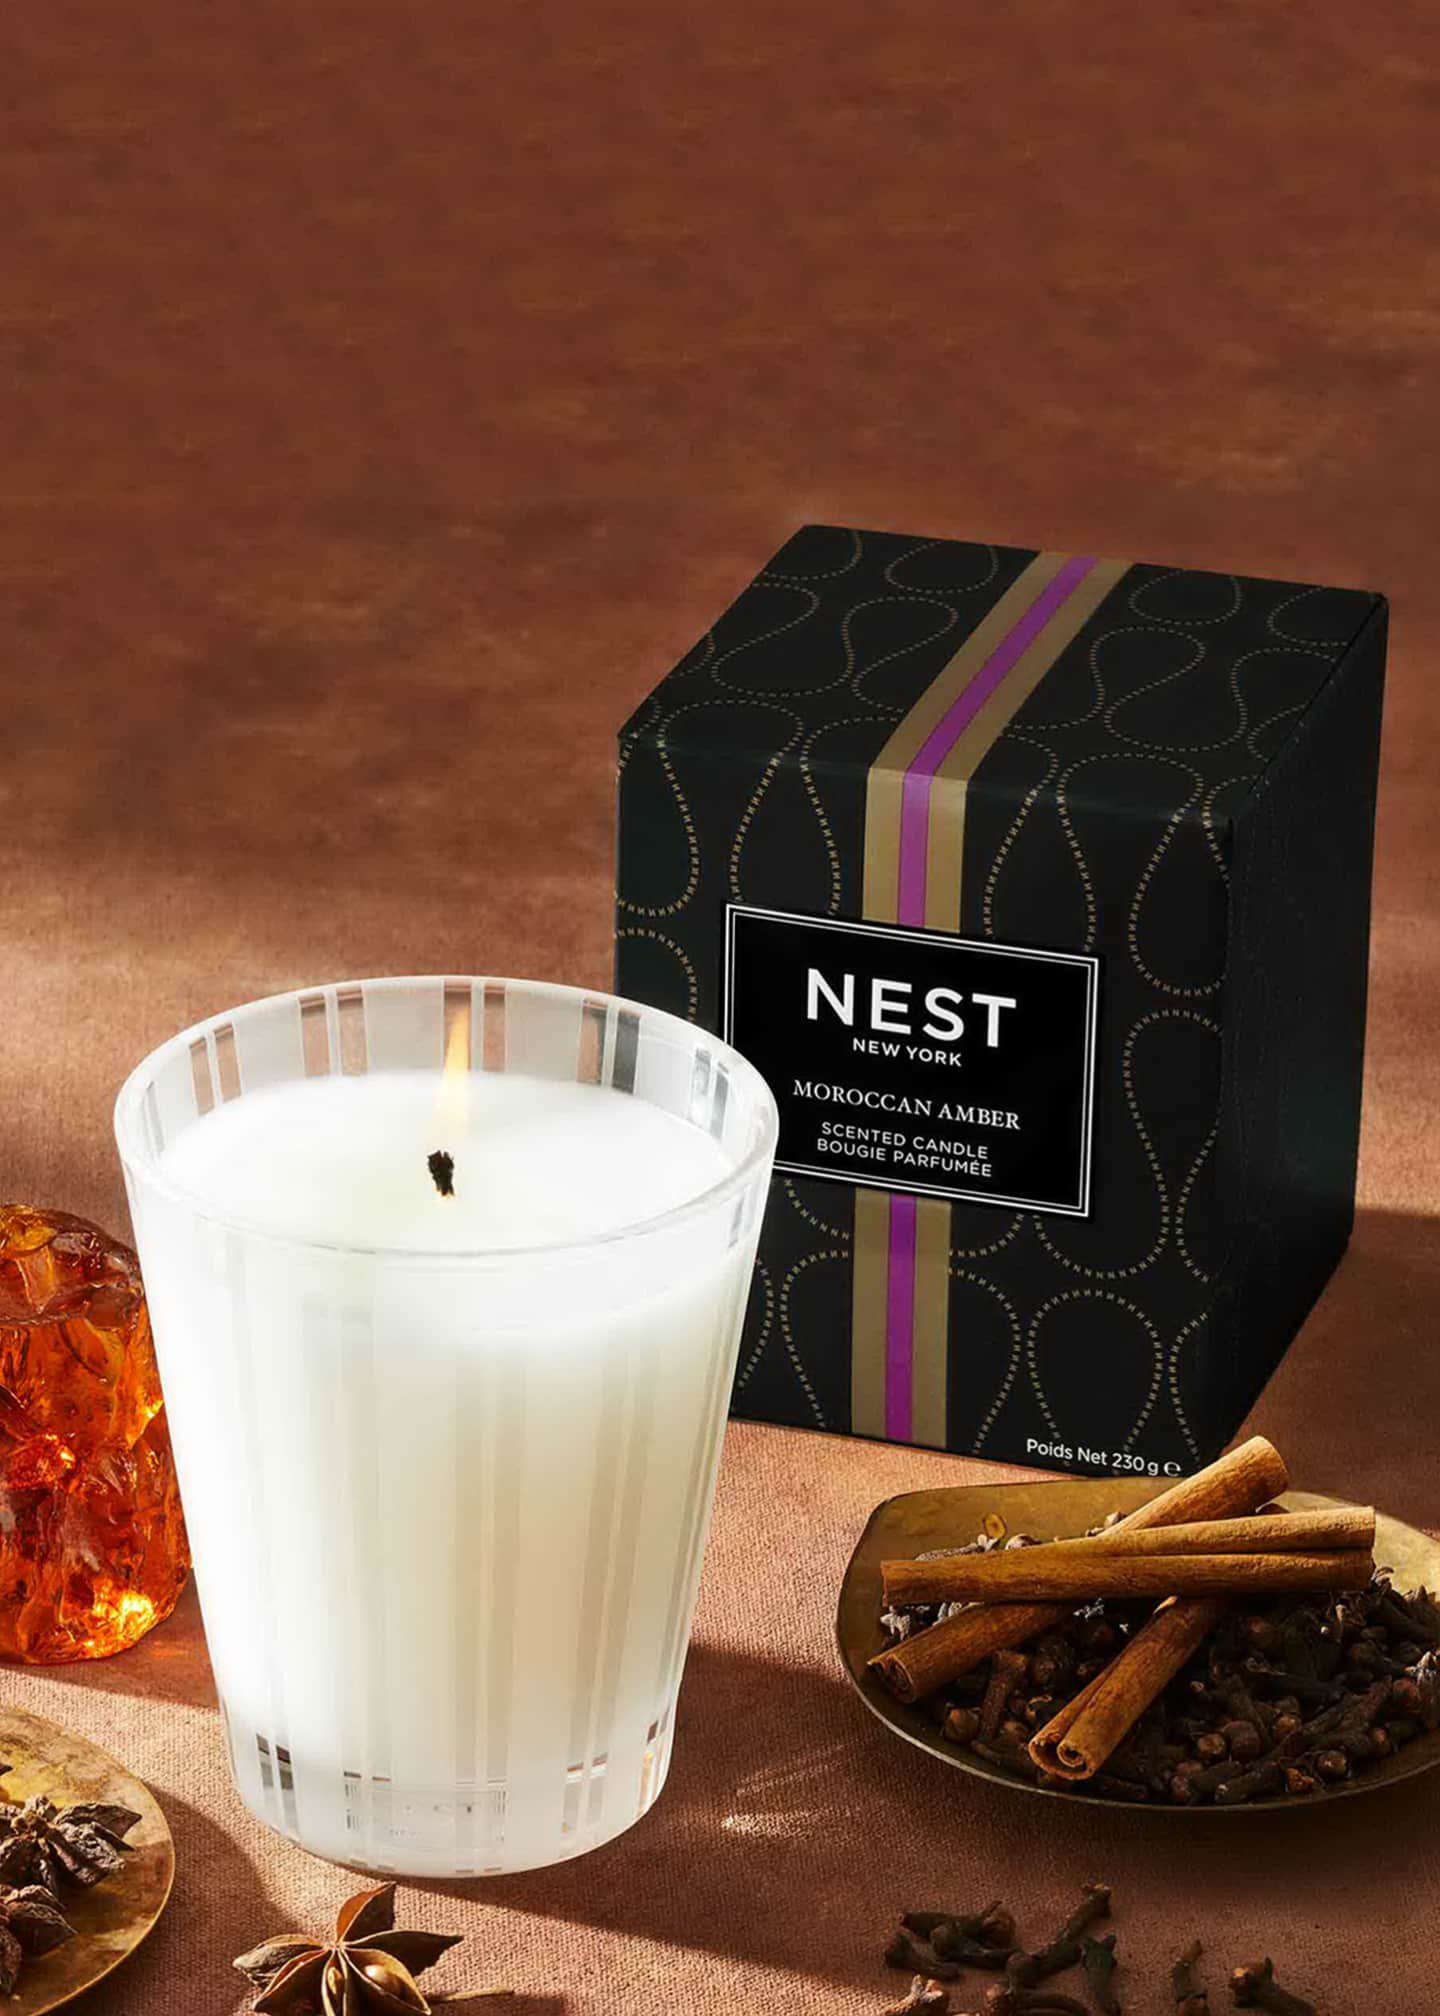 NEST New York Moroccan Amber Scented Candle, 8.1 oz. Image 3 of 5